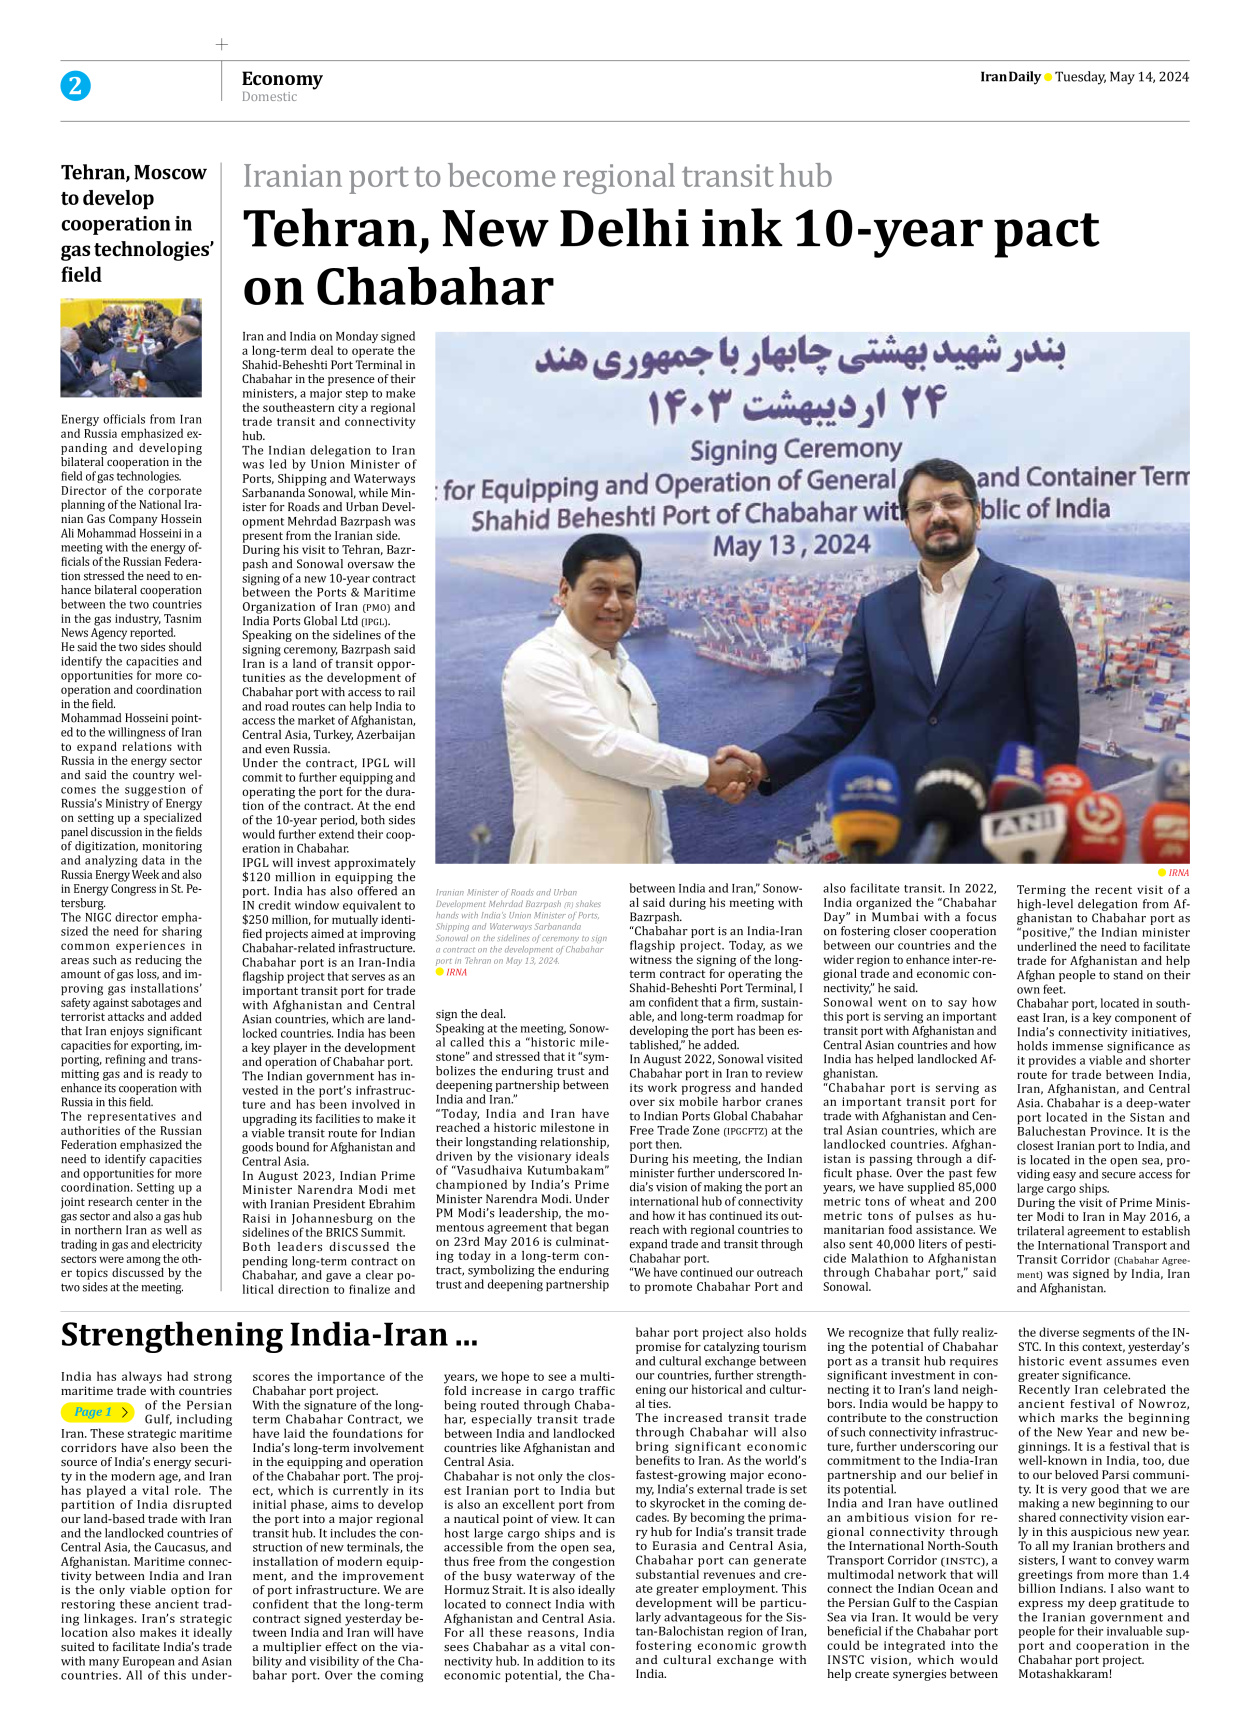 Iran Daily - Number Seven Thousand Five Hundred and Fifty Seven - 14 May 2024 - Page 2